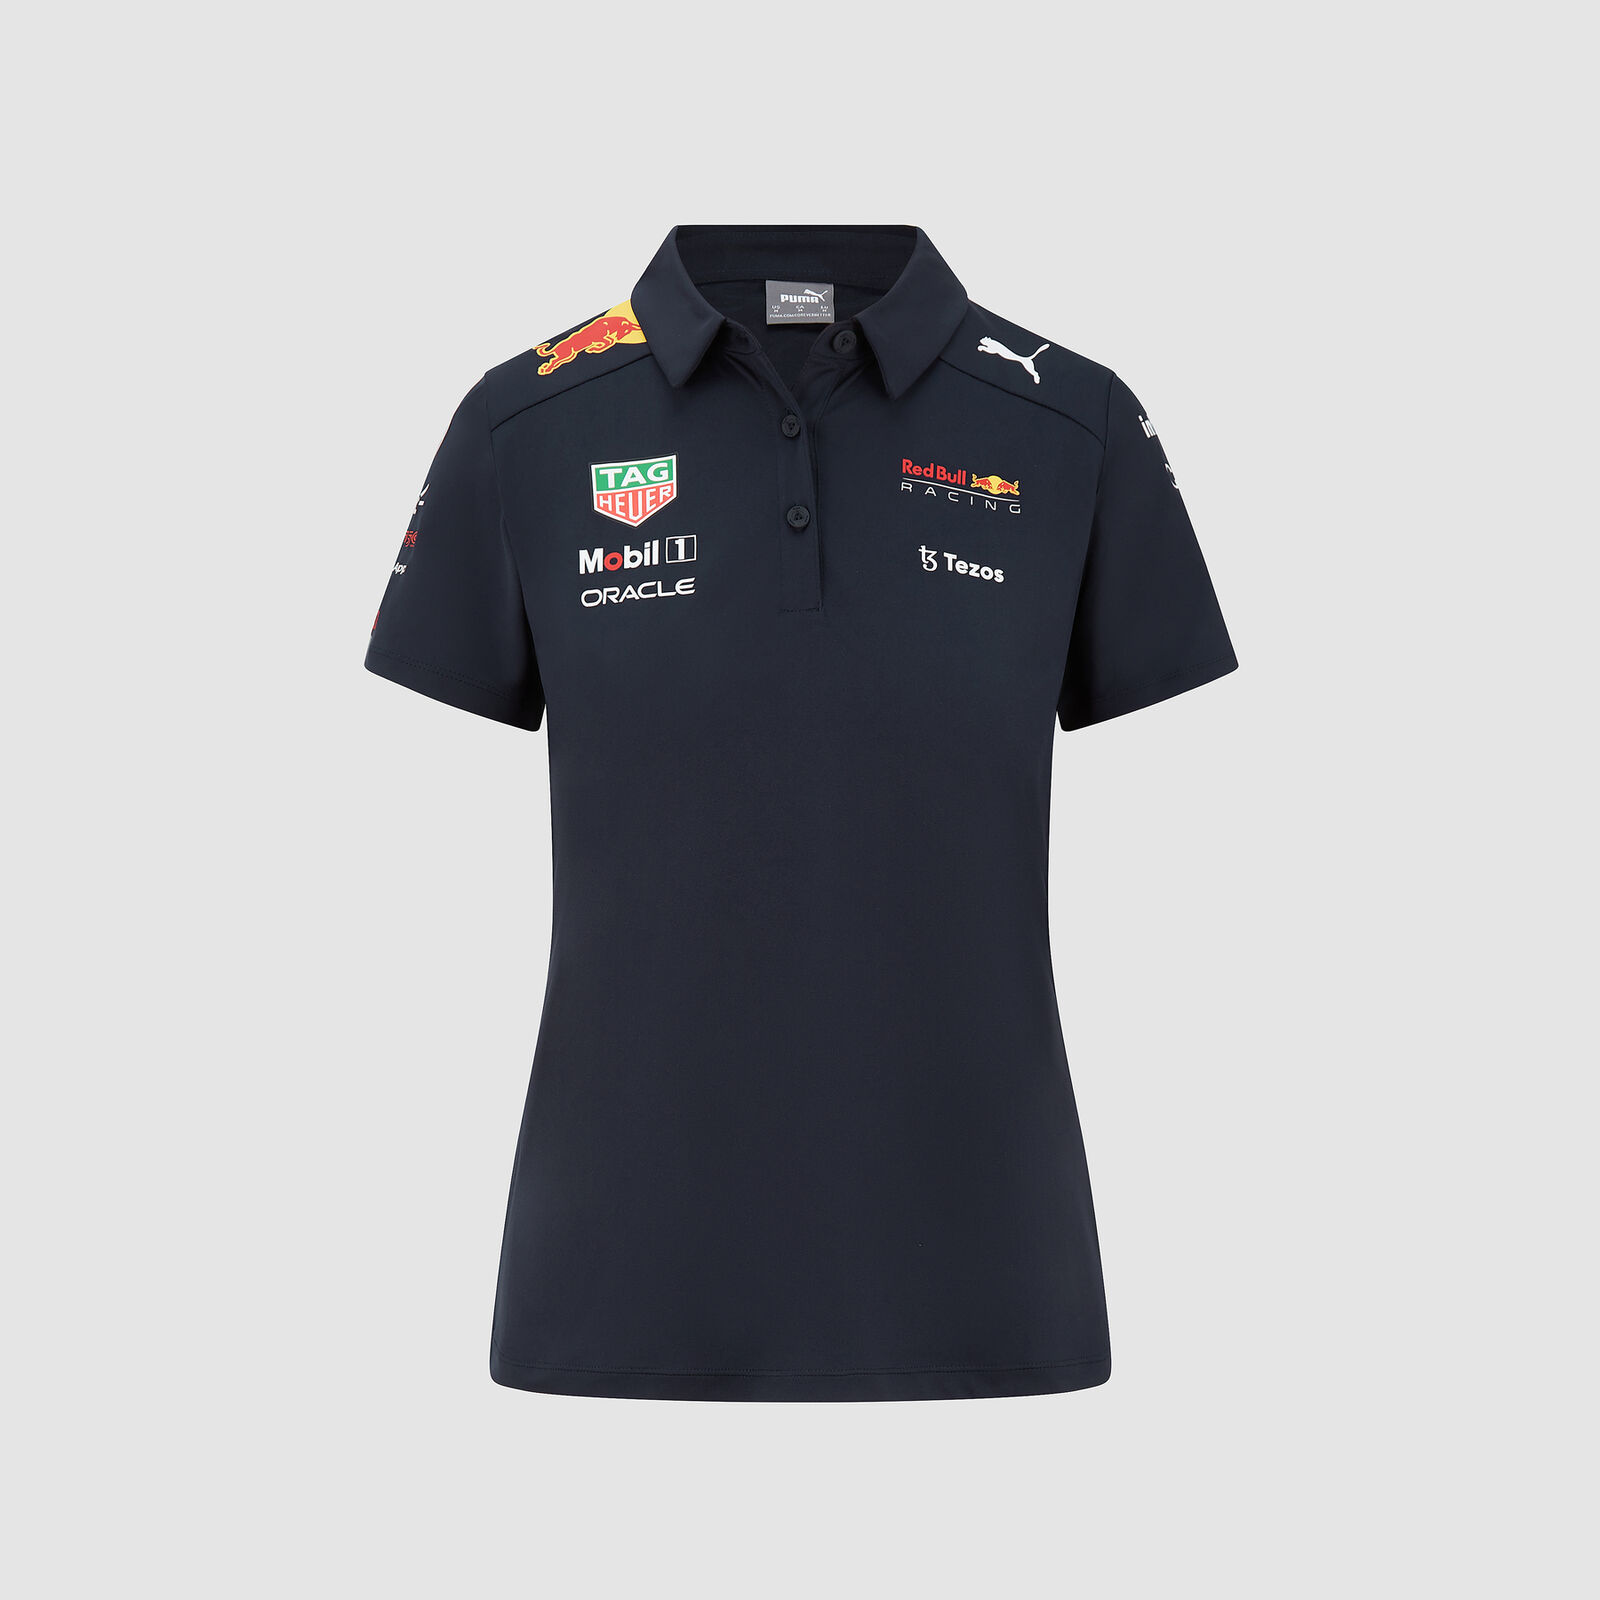 Red Bull Racing F1 Team Polo Shirt 2022, New w/ Tags, L